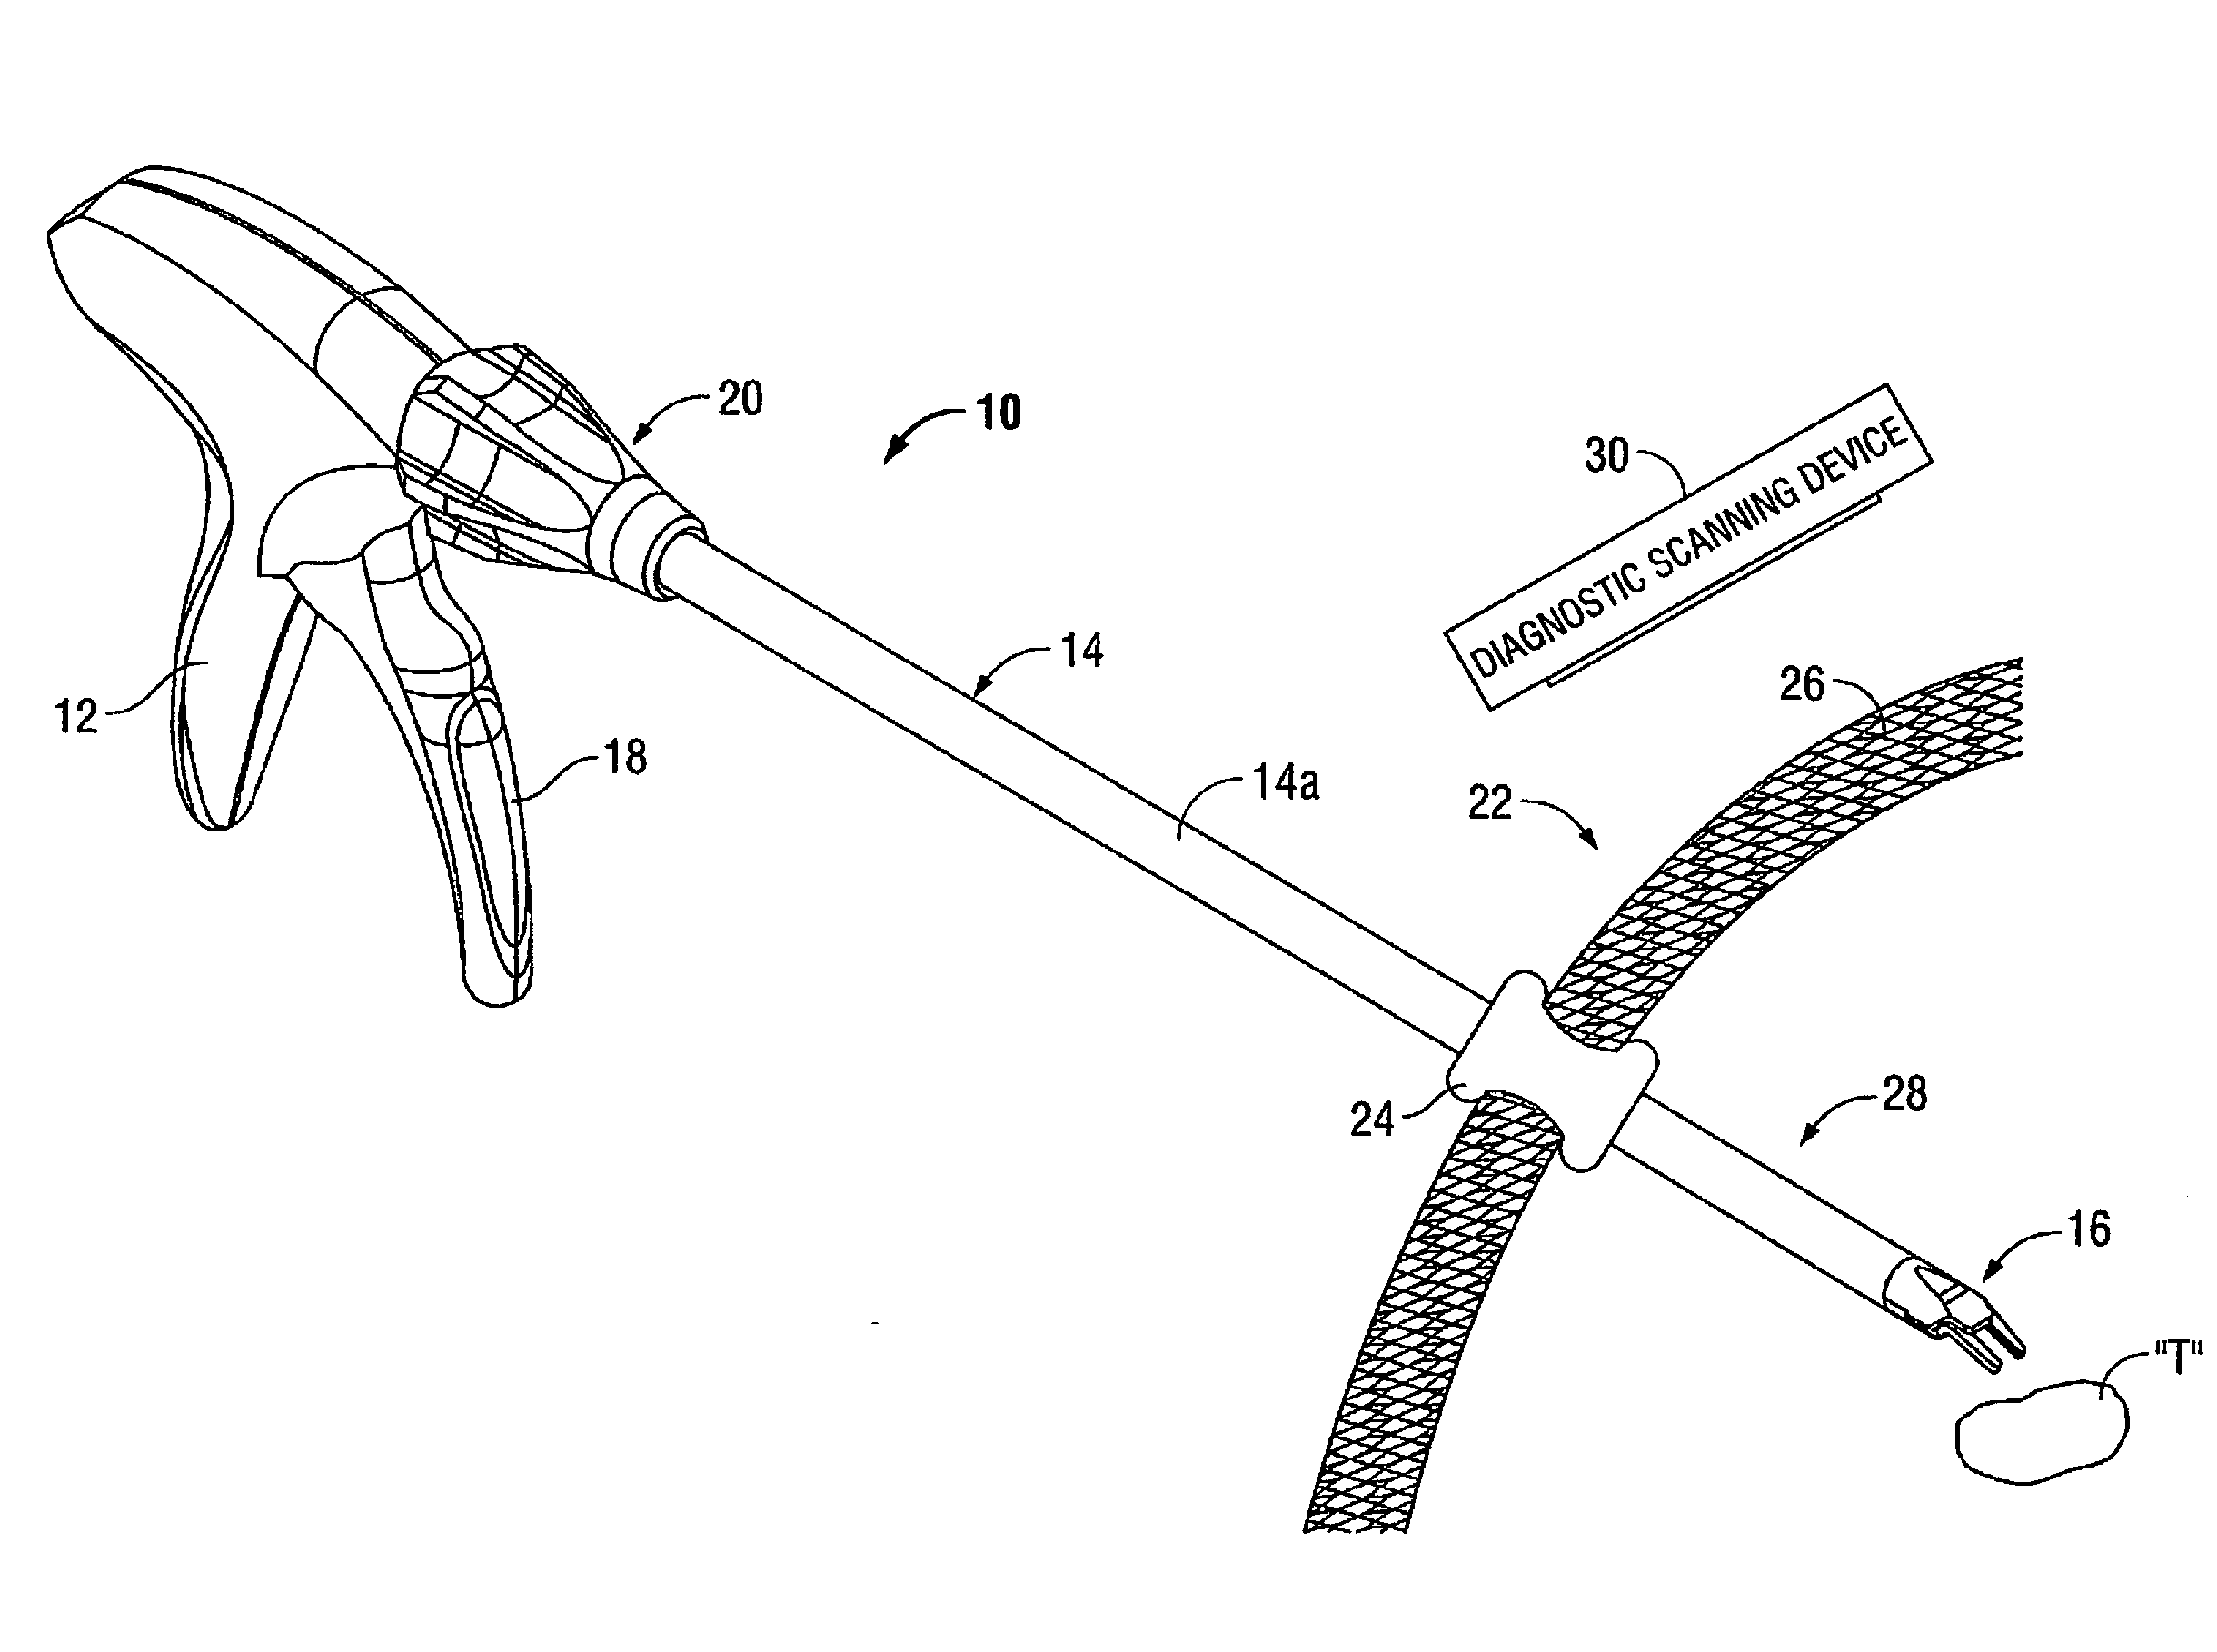 Surgical instruments for use with diagnostic scanning devices